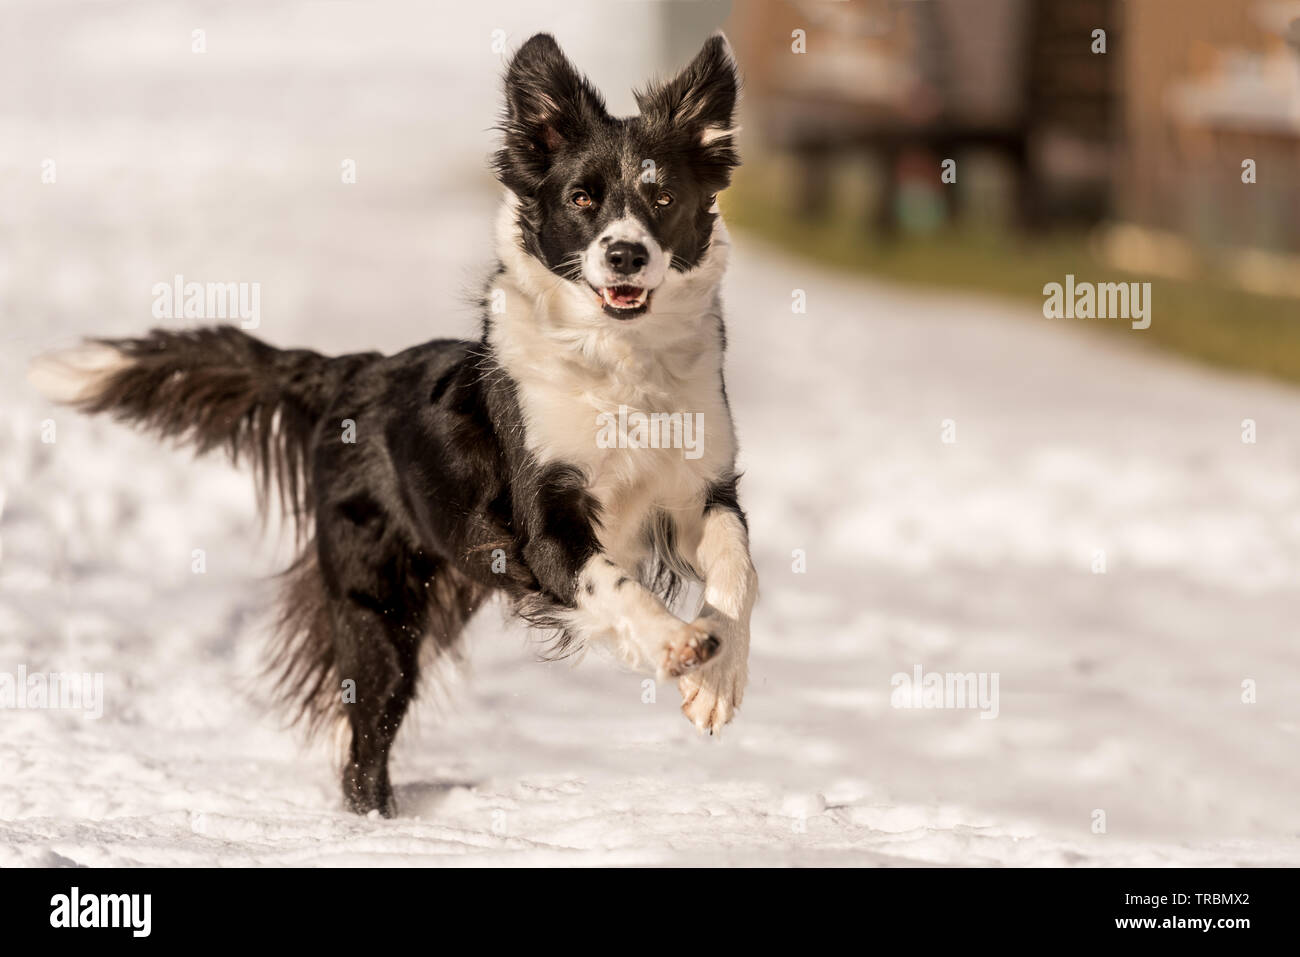 Young Cute Border collie dog in snowy winter. Dog running and having fun in the snow Stock Photo